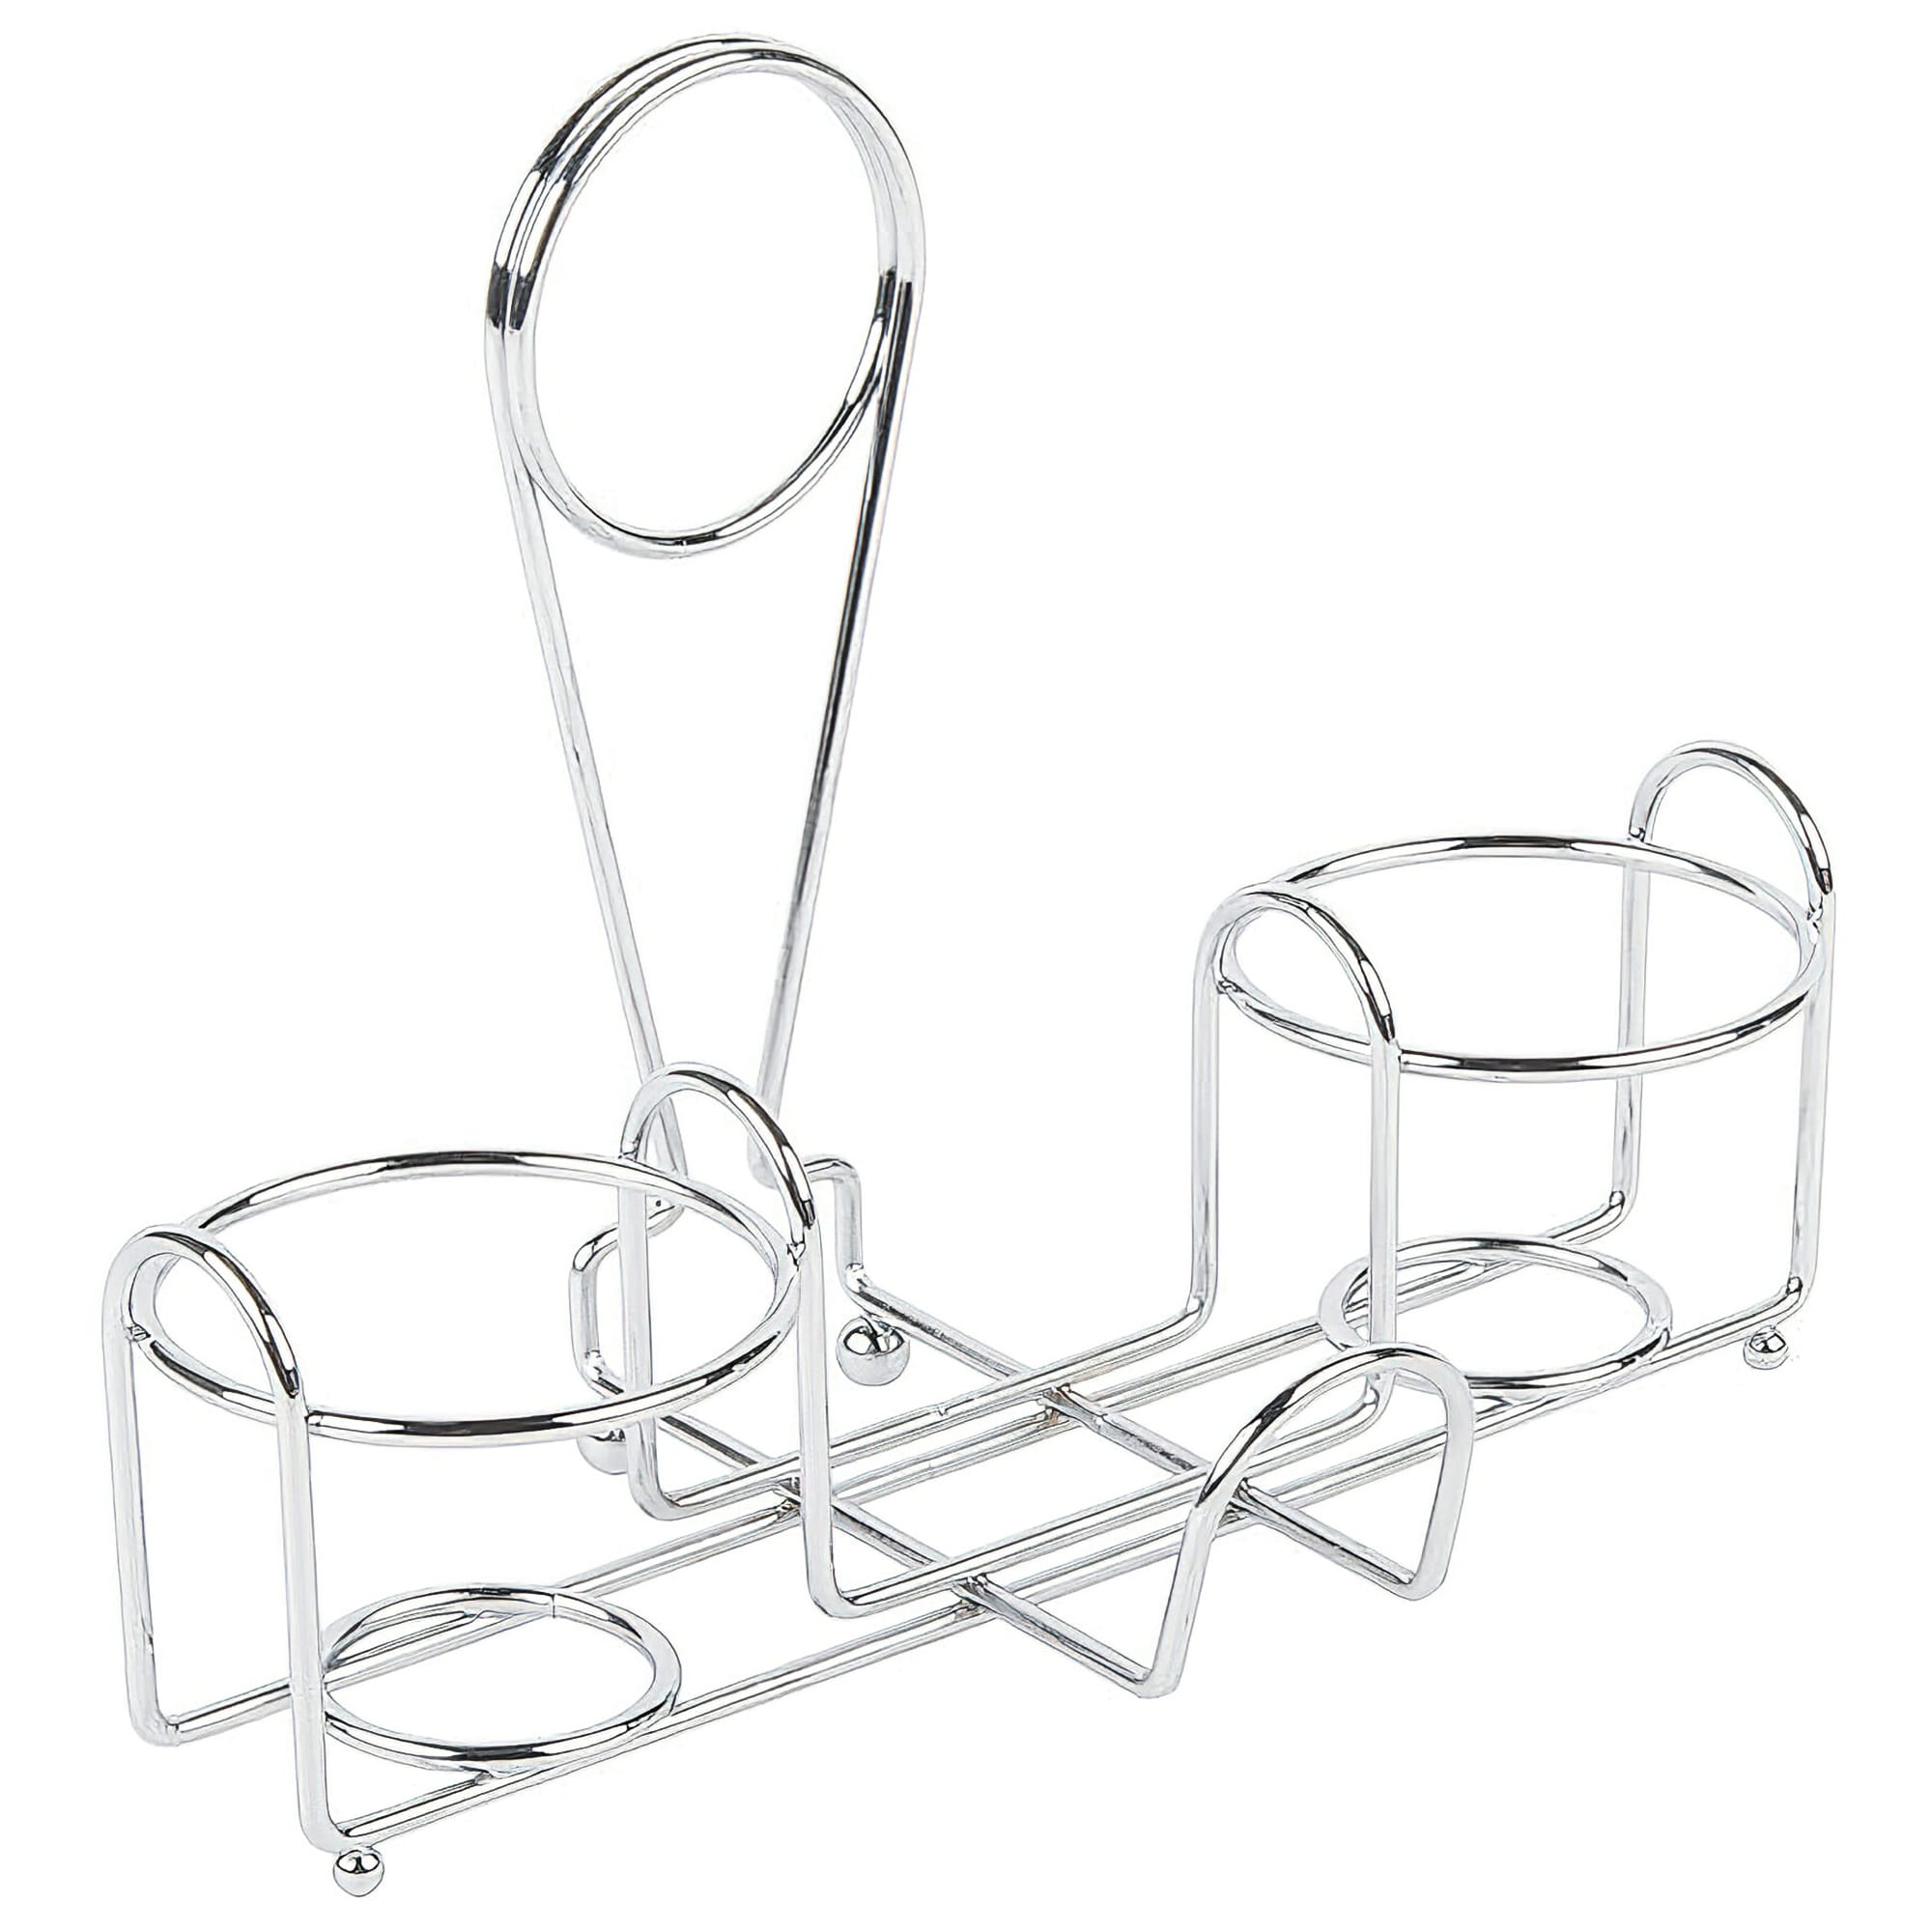 G.E.T. 4-21696 Chrome Plated Metal 4-Compartment Table Caddy